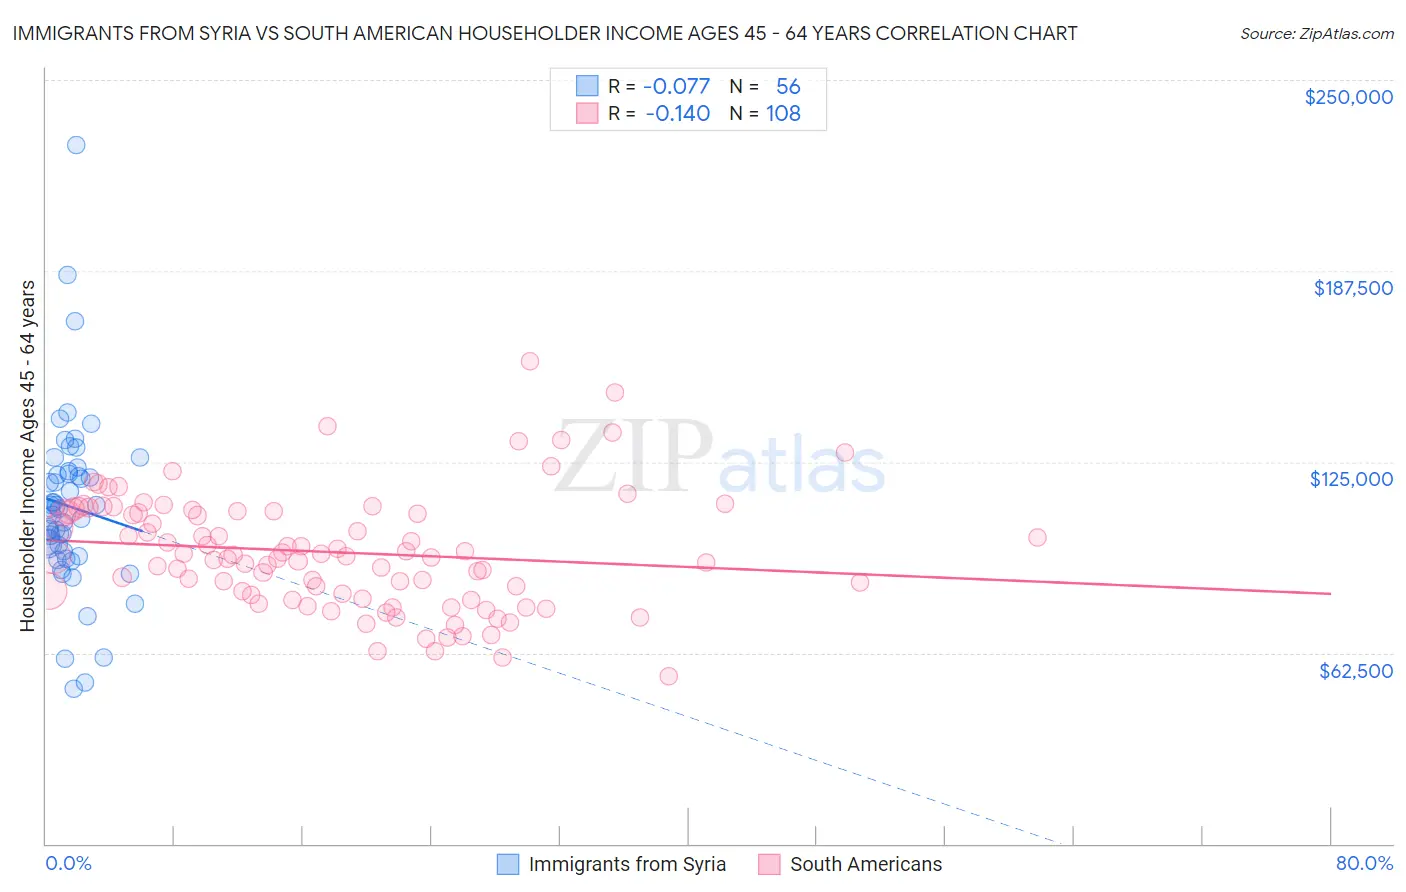 Immigrants from Syria vs South American Householder Income Ages 45 - 64 years